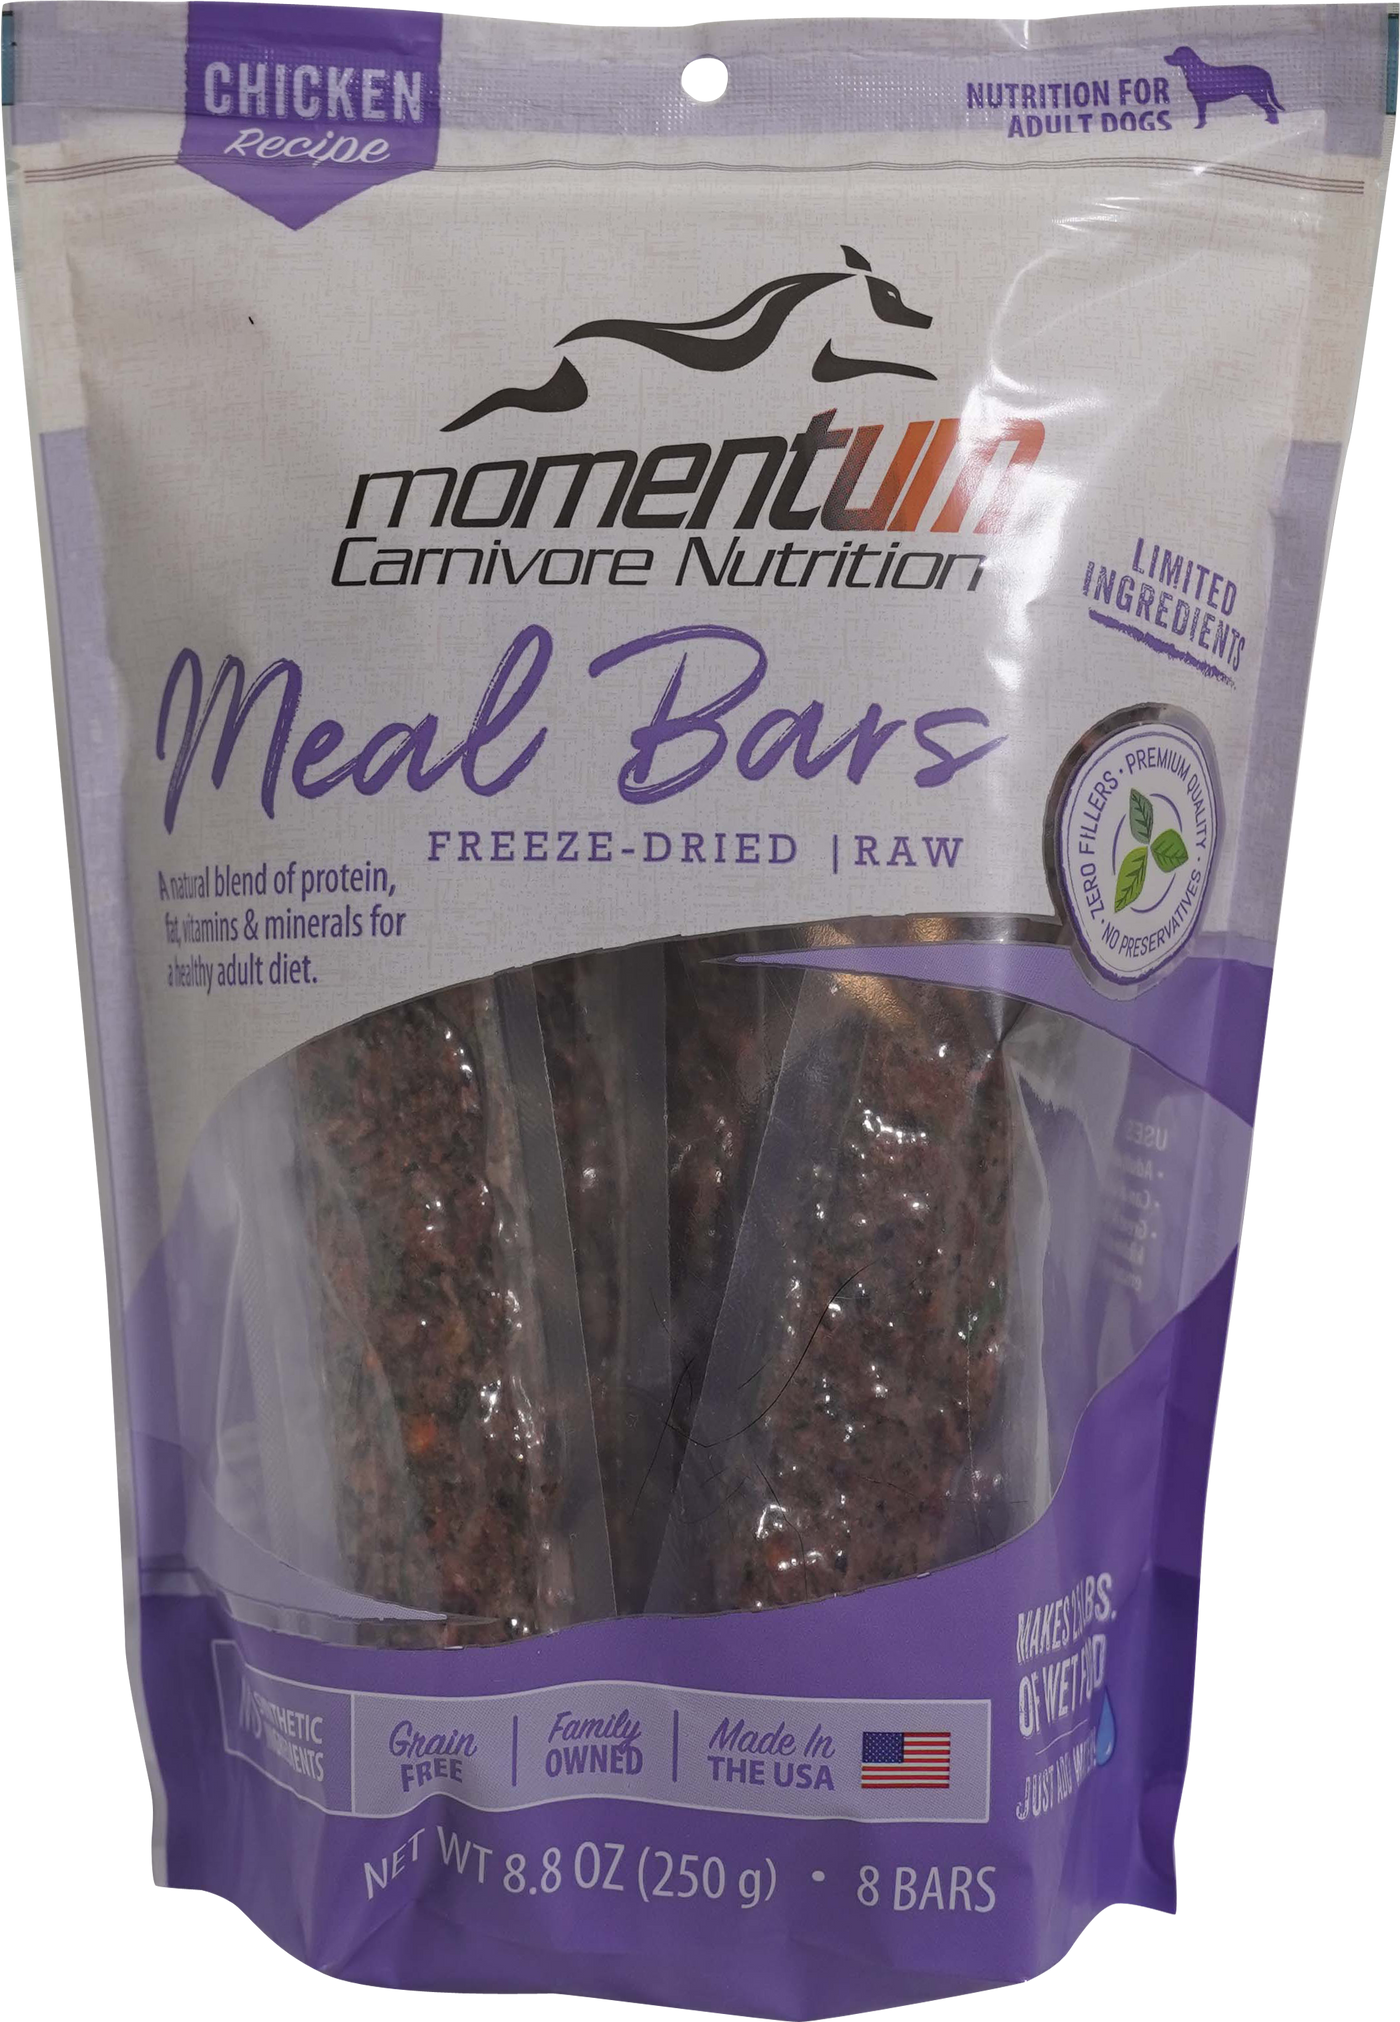 Chicken Meal Bars